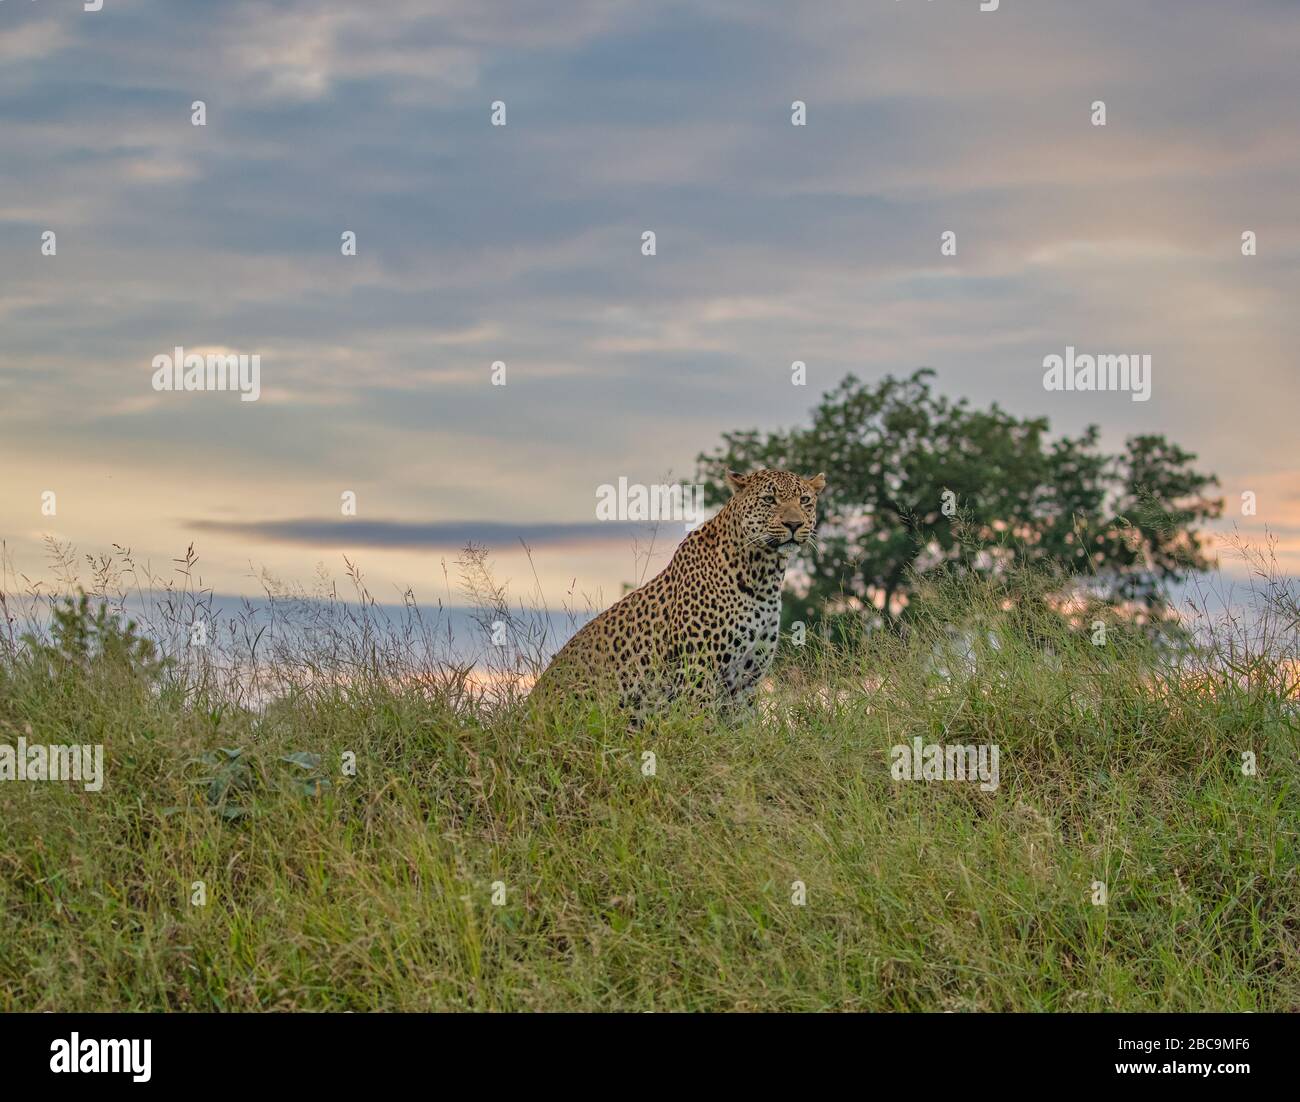 Leopard of the Greater Kruger National Park, South Africa Stock Photo